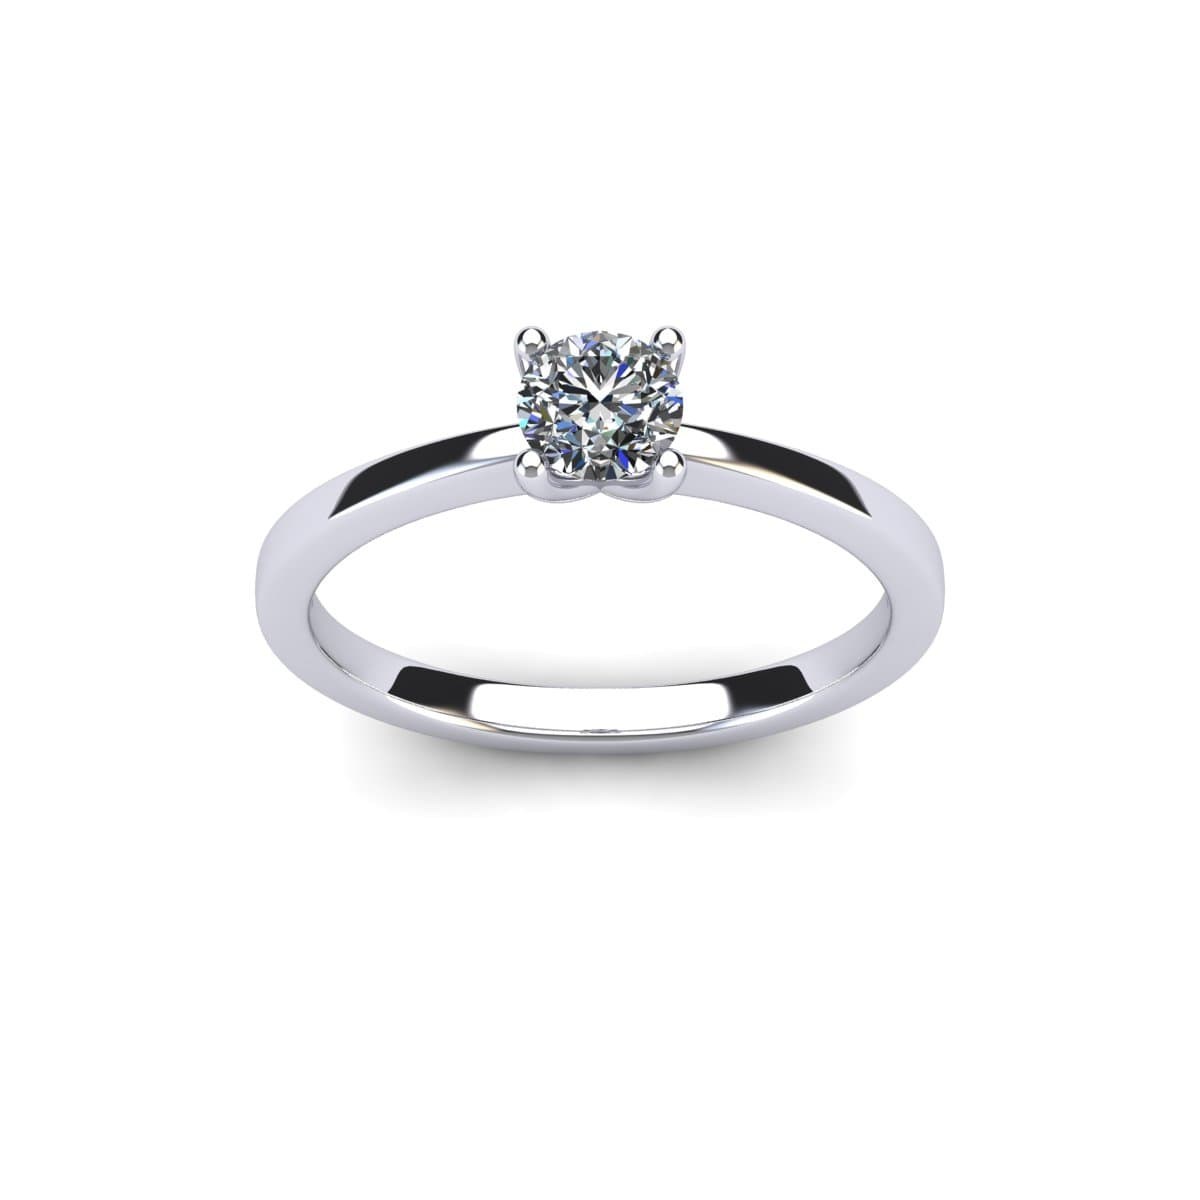 ITALIANGRESS Four Prong Classic Solitaire